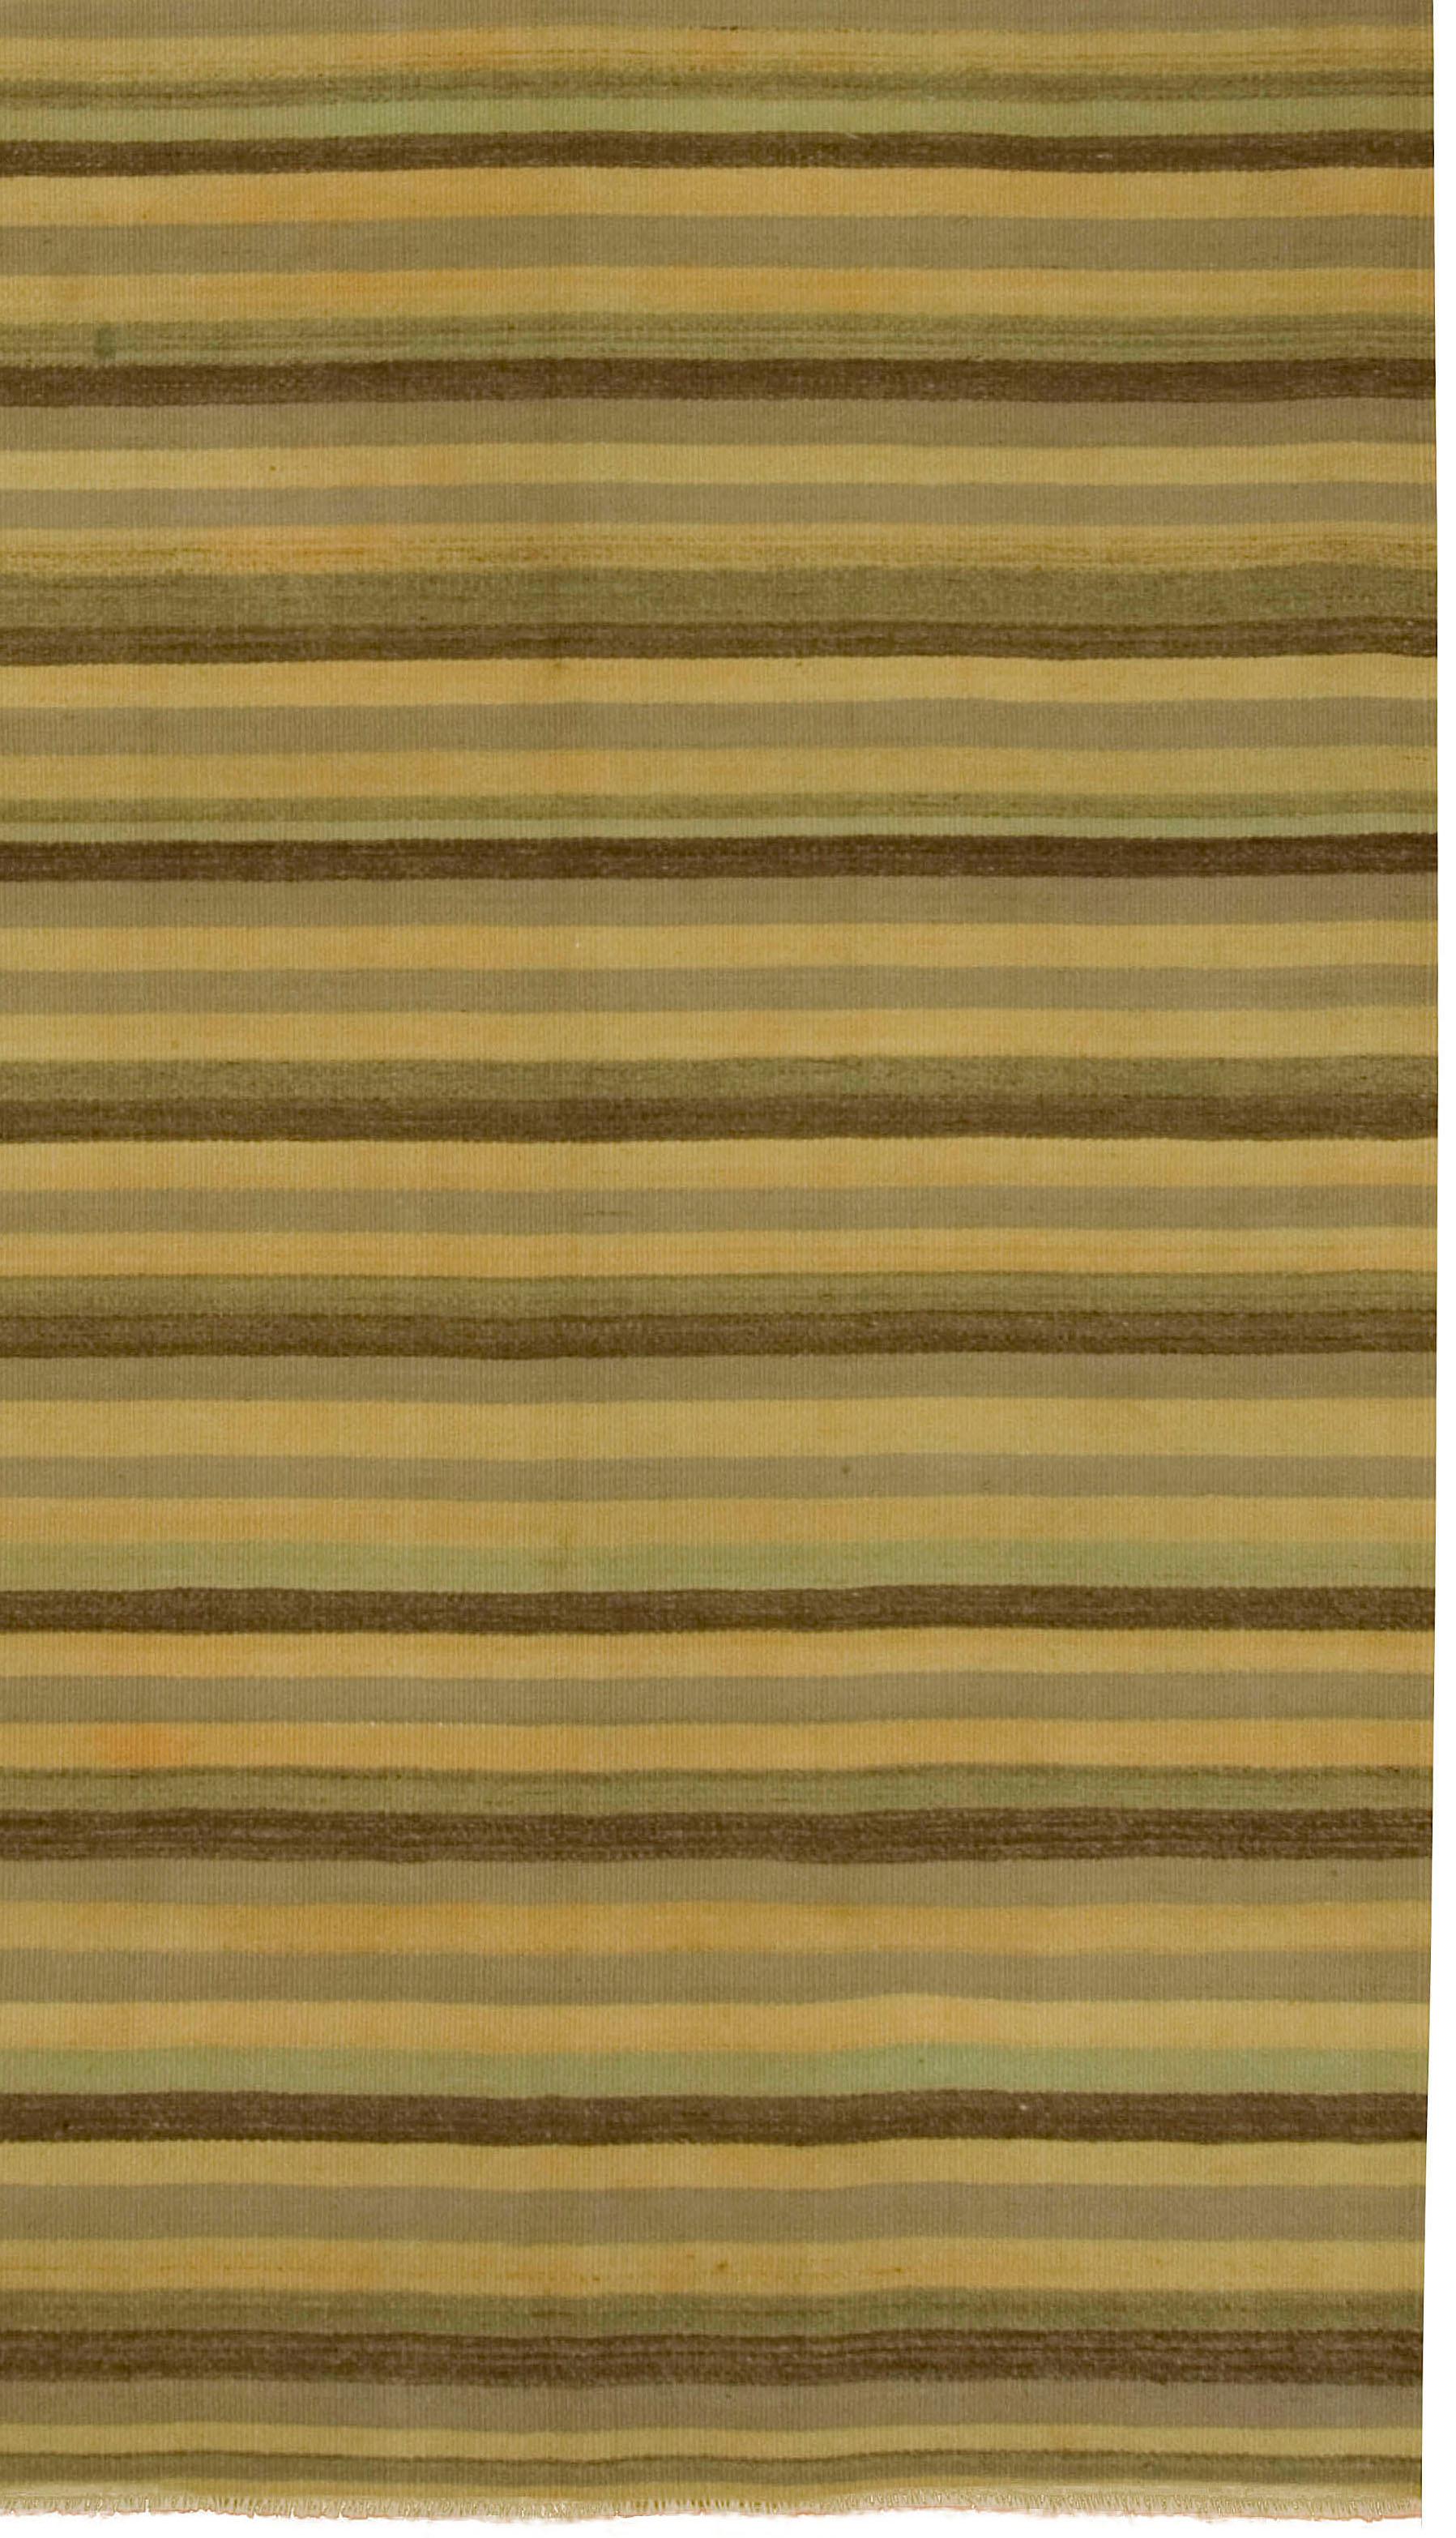 Vintage Turkish Kilim runner, measure: 4'4 x 10'10. This vintage Turkish flat-weave Kilim was handwoven in the 1950s. The simplicity and boldness of these pieces can also give a contemporary feel and can look at home in both a modern or traditional